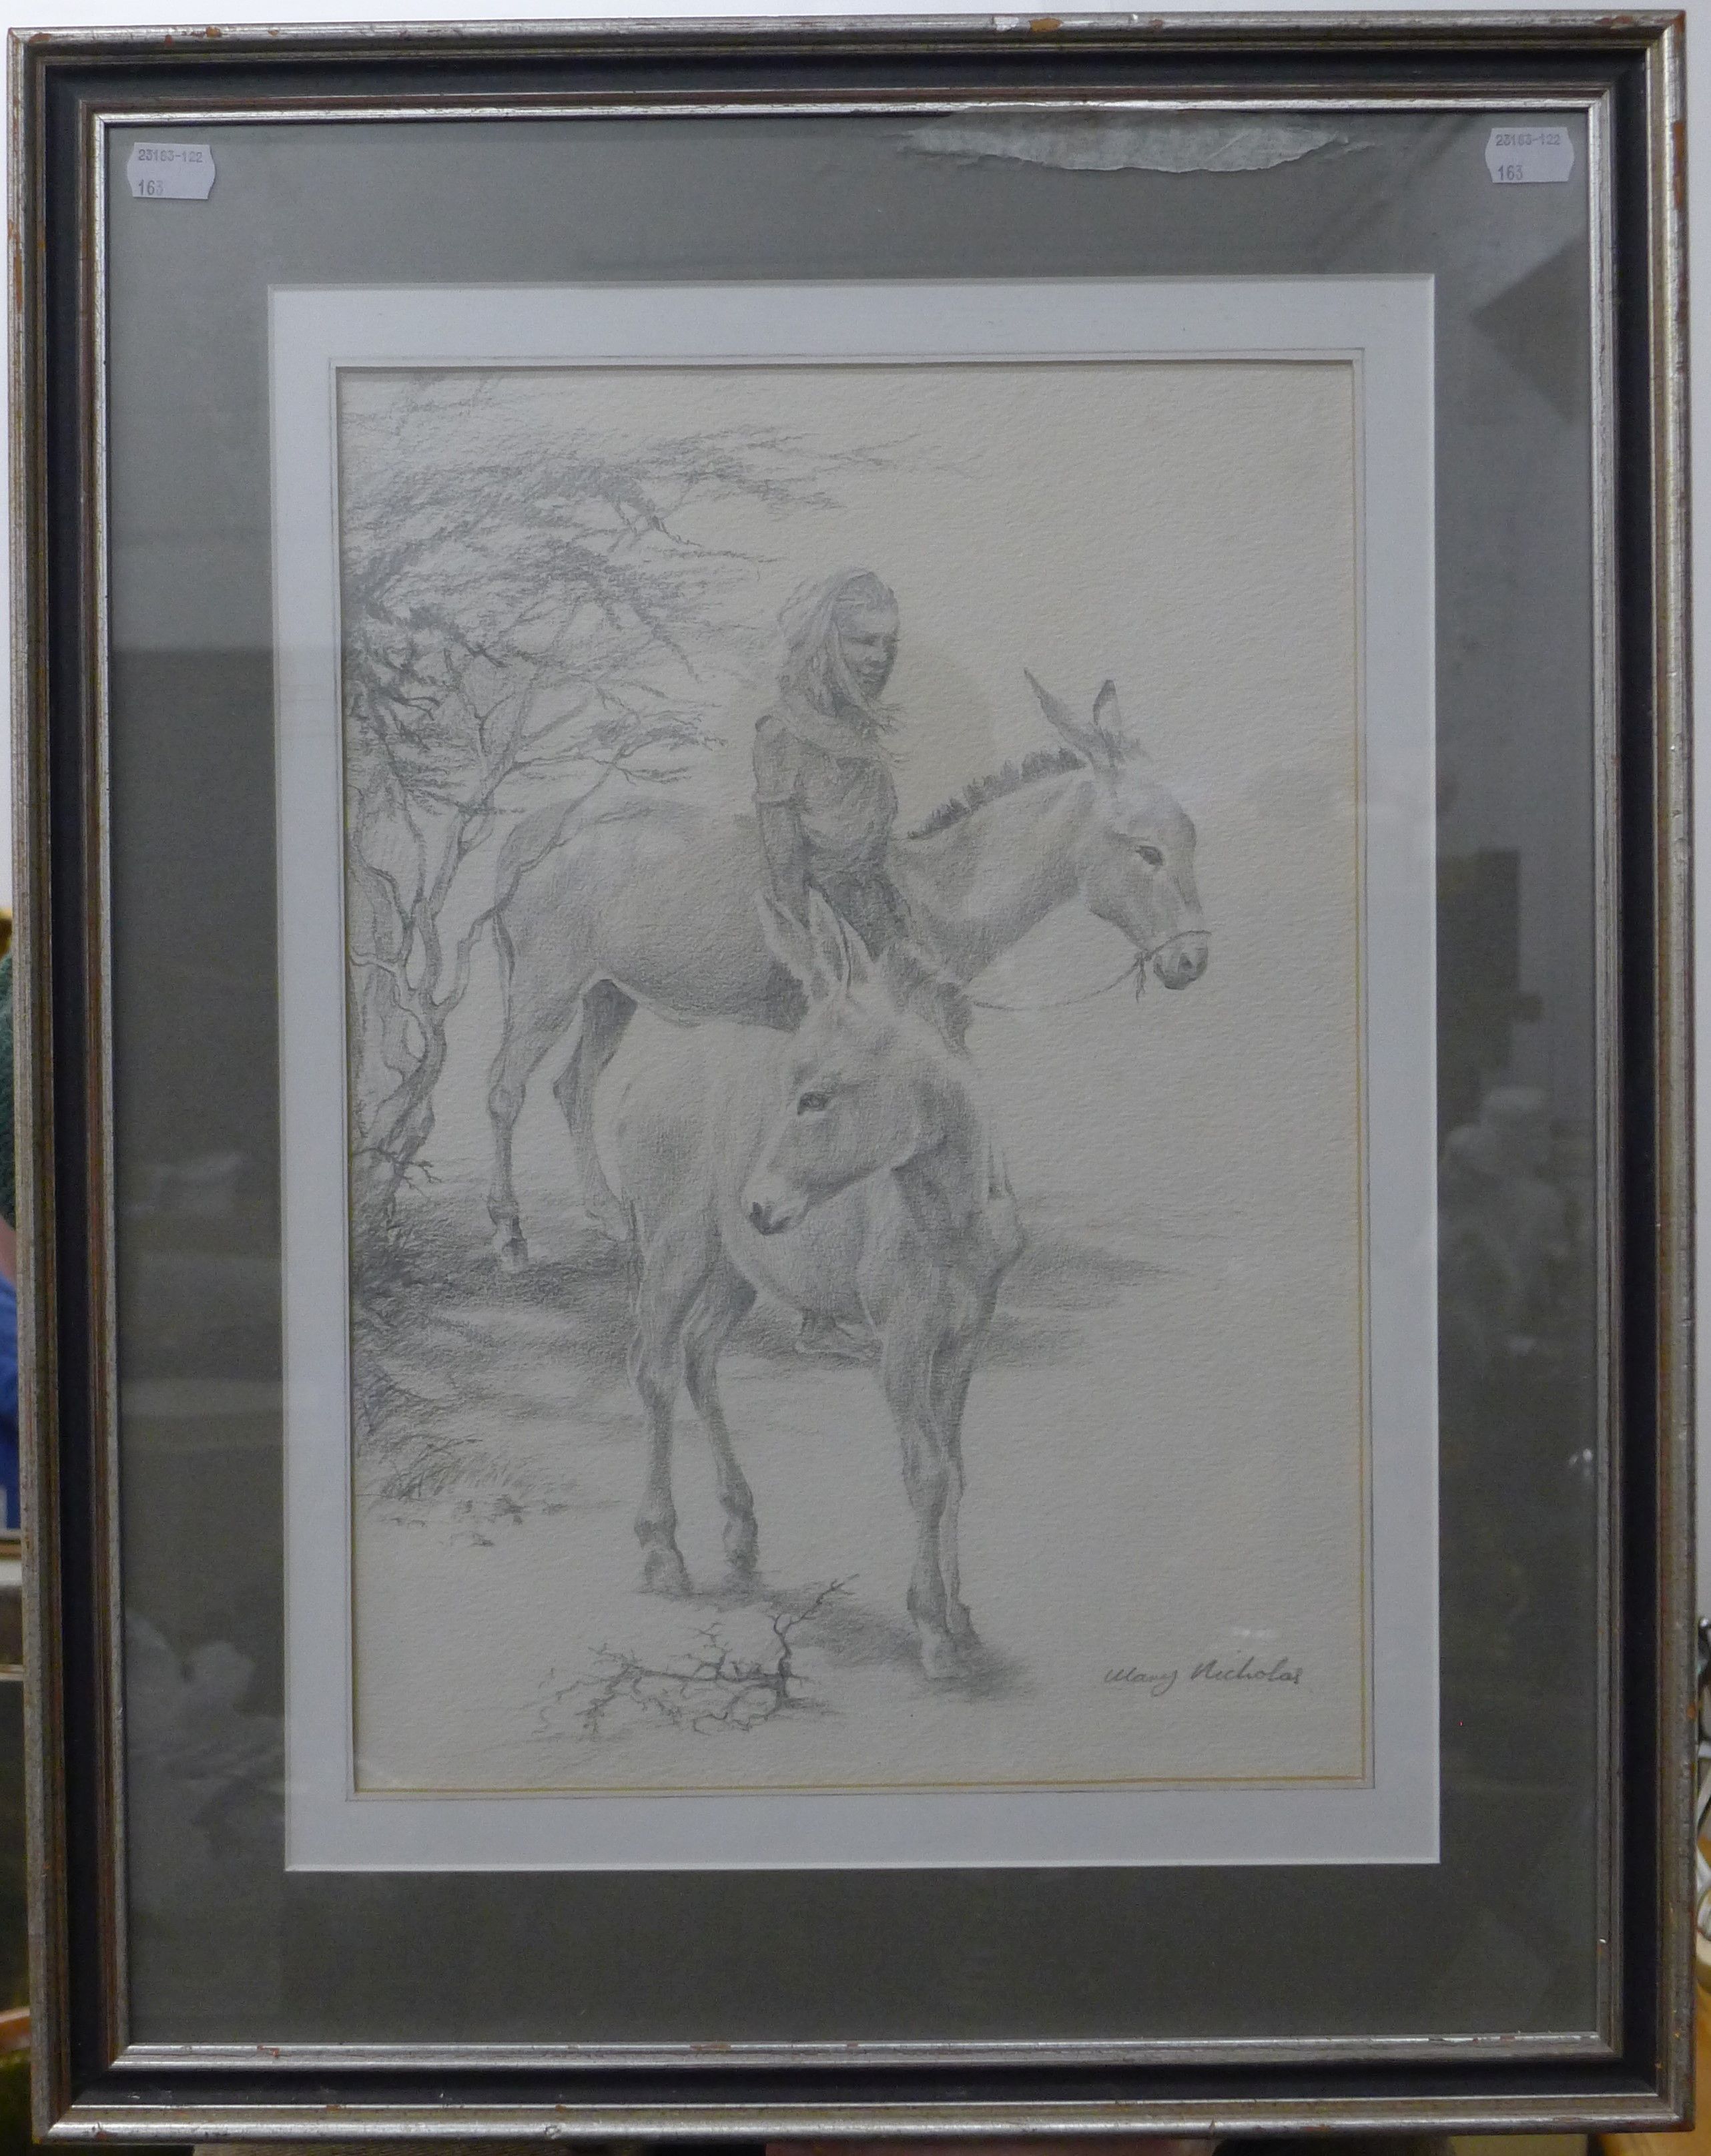 MARY NICHOLAS, Woman with Donkeys, pencil, framed and glazed. 30 x 42 cm. - Image 2 of 3